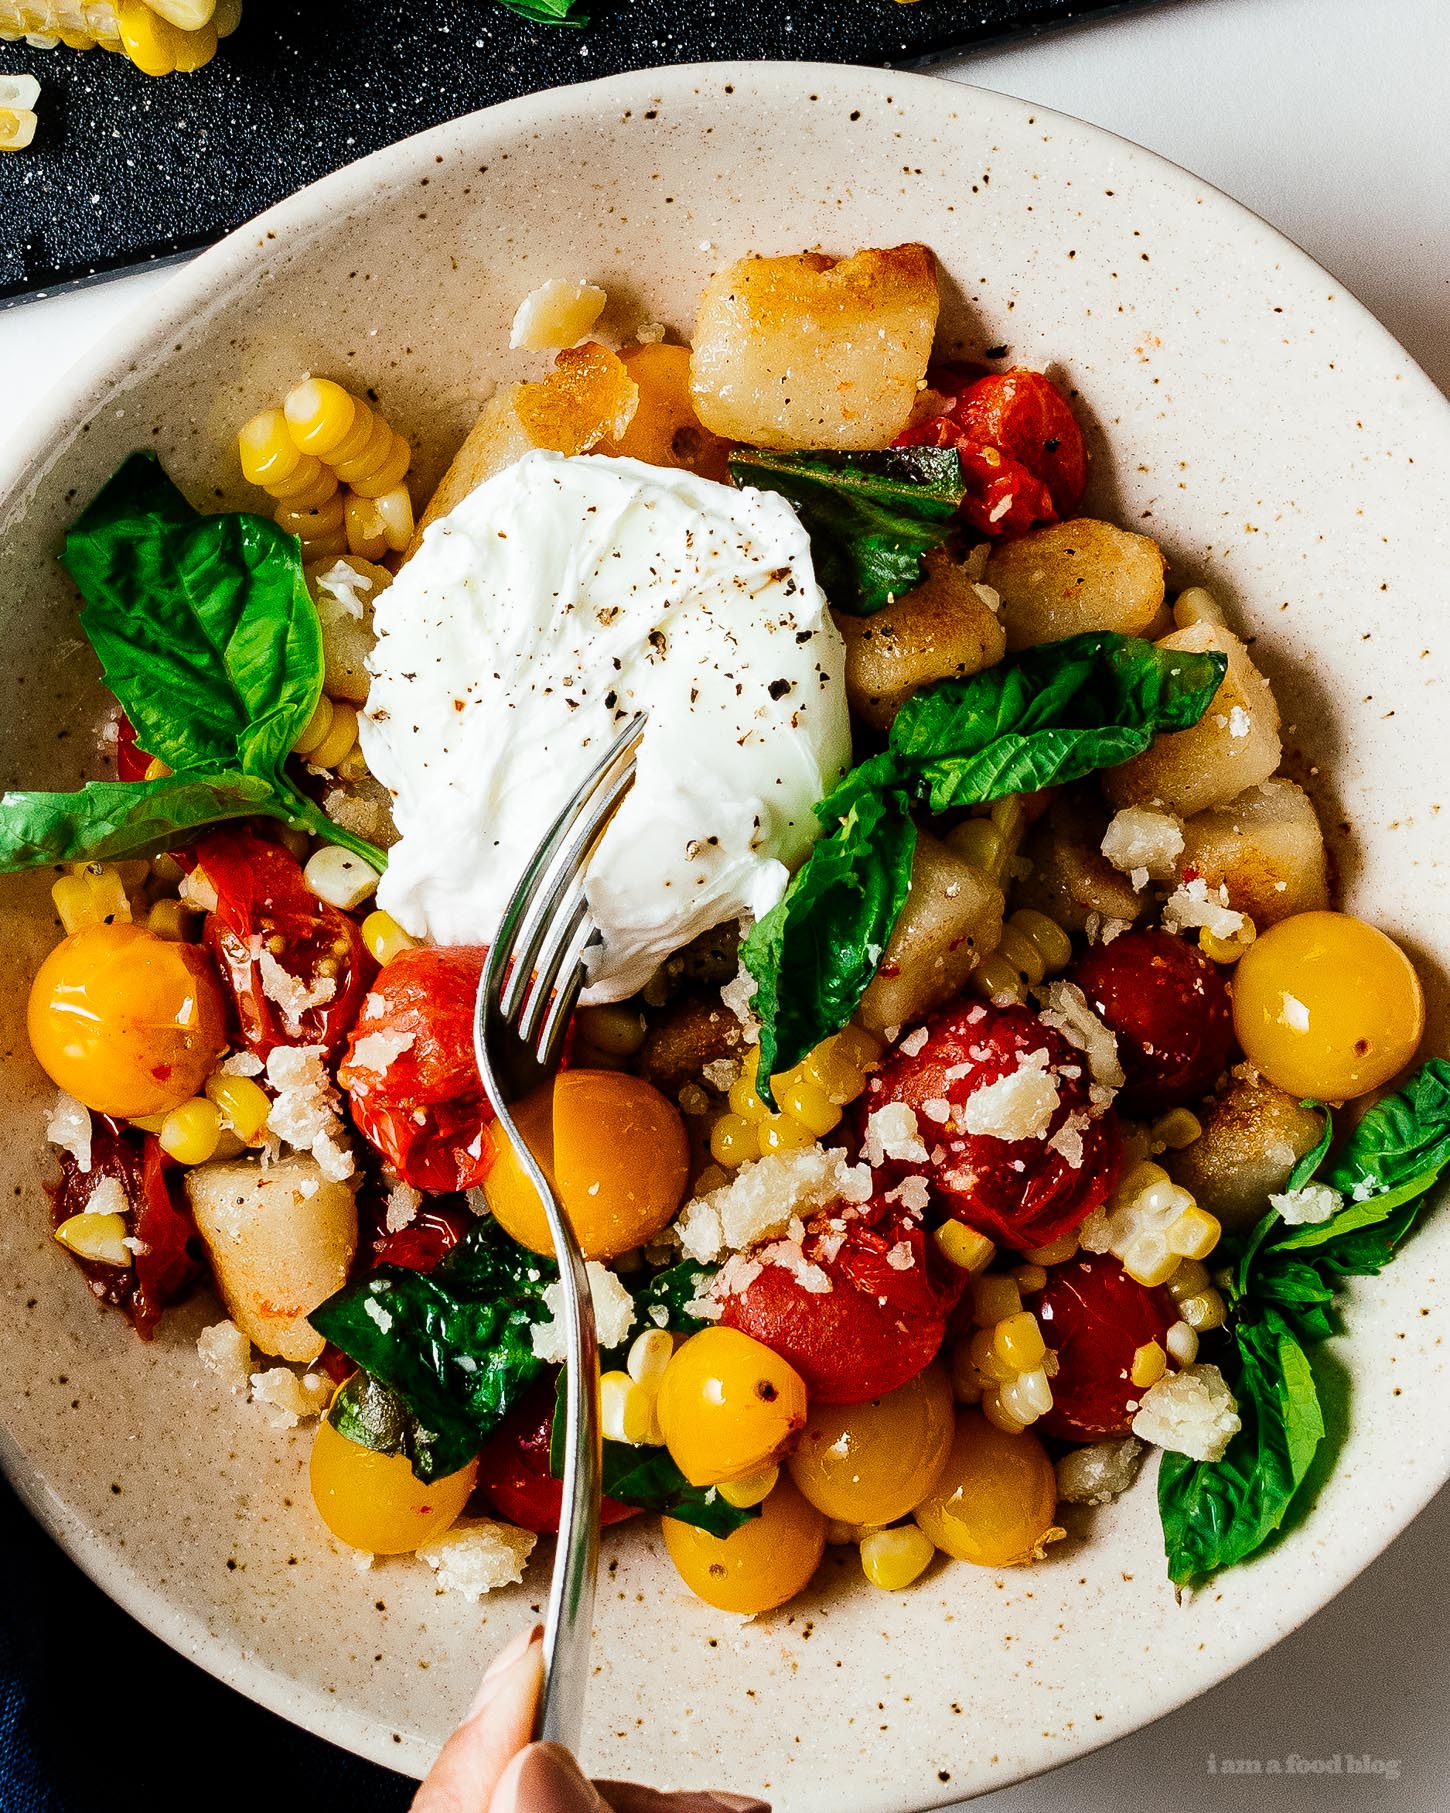 How to cook trader joe’s cauliflower gnocchi with sweet oven roasted tomatoes and corn with the best low carb gnocchi out there: cauliflower gnocchi. Super easy, light, tasty, and filling! #cauliflowergnocchi #traderjoes #cauliflowerrecipes #cauliflower #gnocchi #tomatoes #corn #recipes #dinnerrecipes #dinner